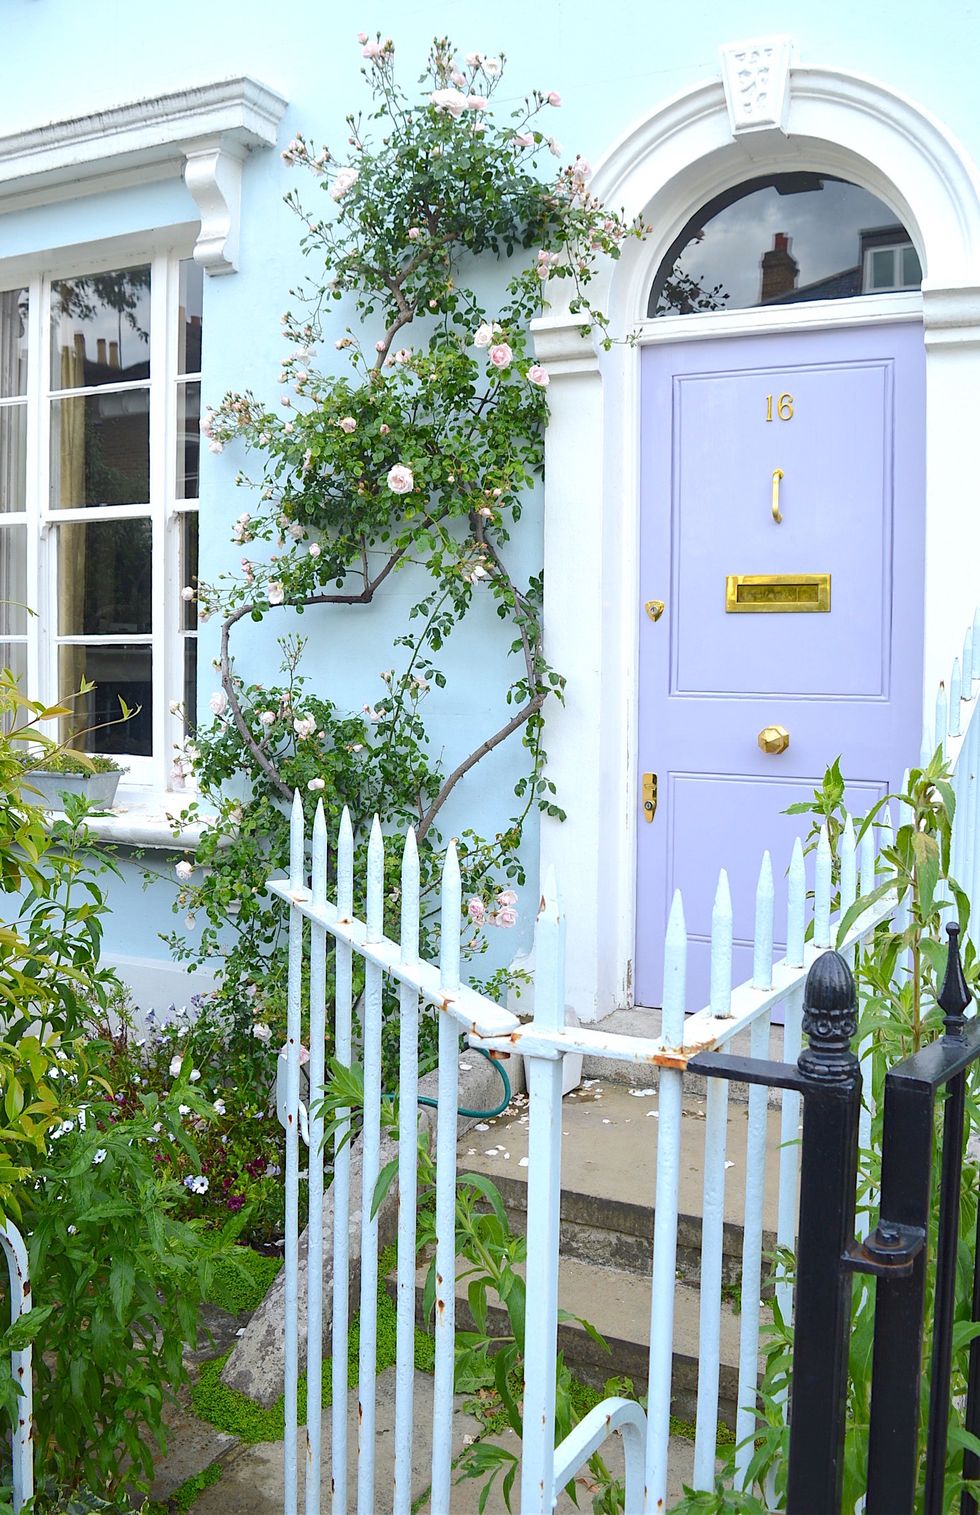 <p>Running through Hammersmith and Fulham, Wingate Road is one of the sweetest streets, packed with pastel homes, quaint gardens and amazing entrances–like this one.</p>